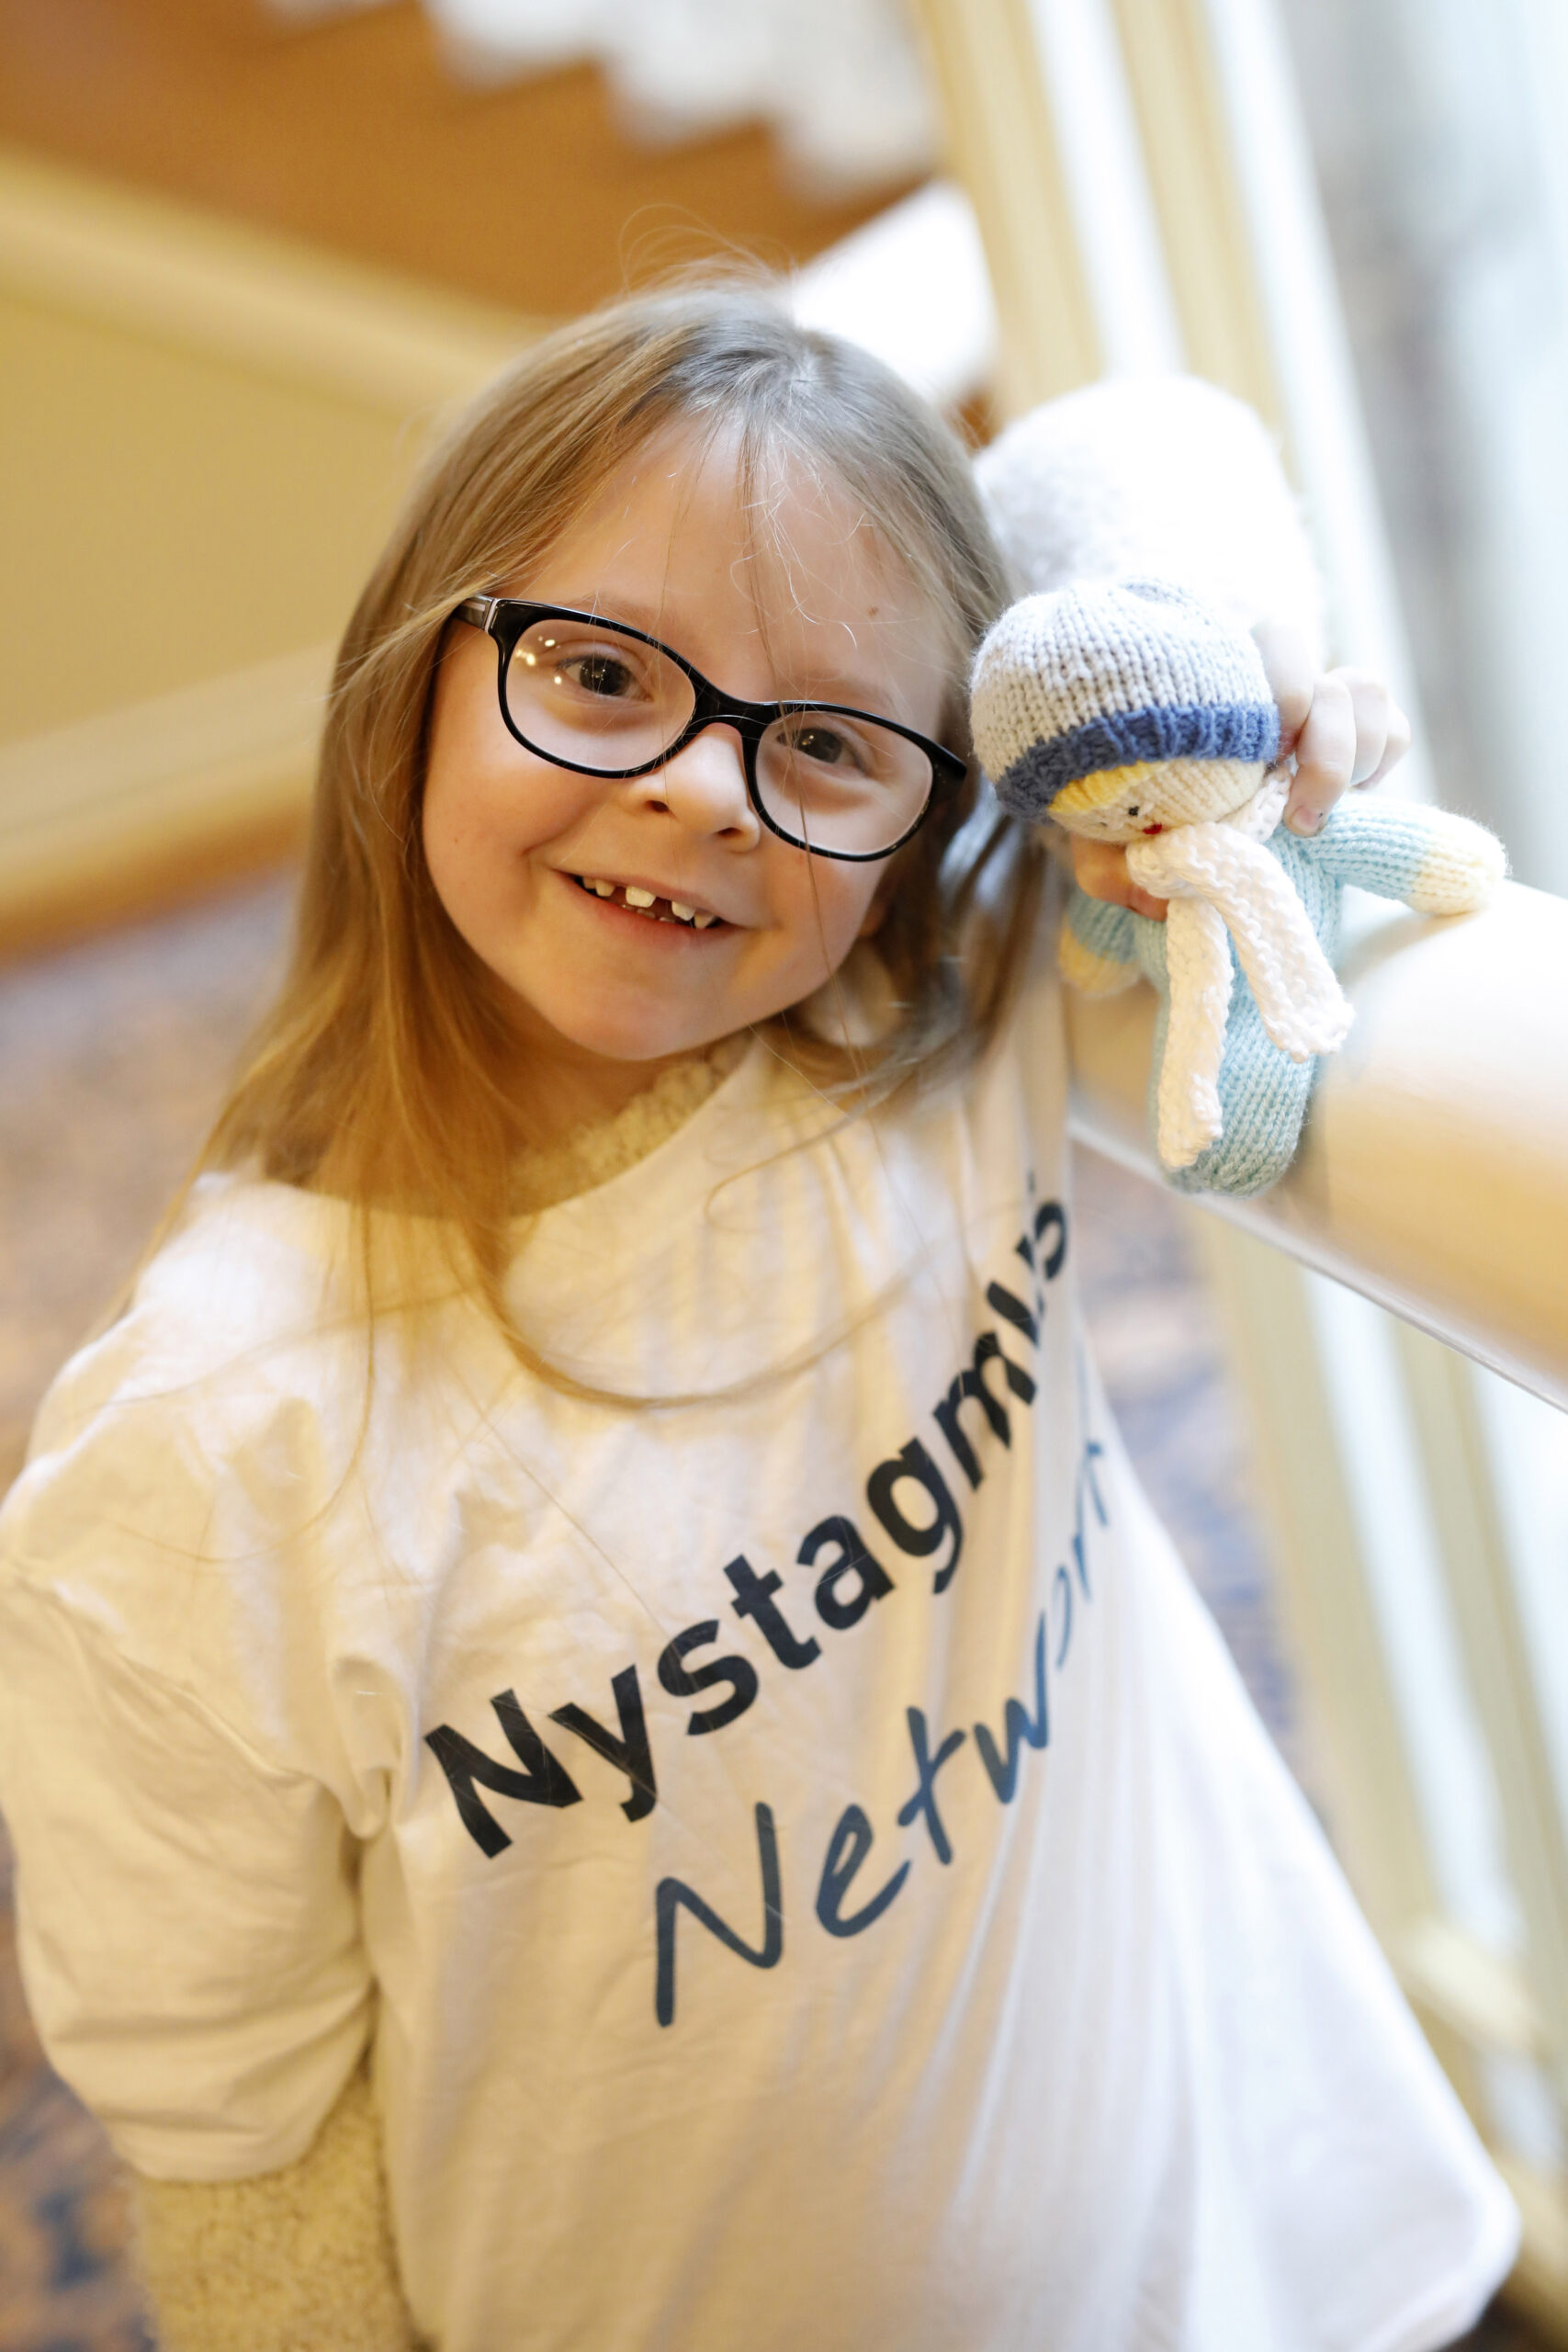 Child wearing a Nystagmus Network T shirt and holding a mascot.